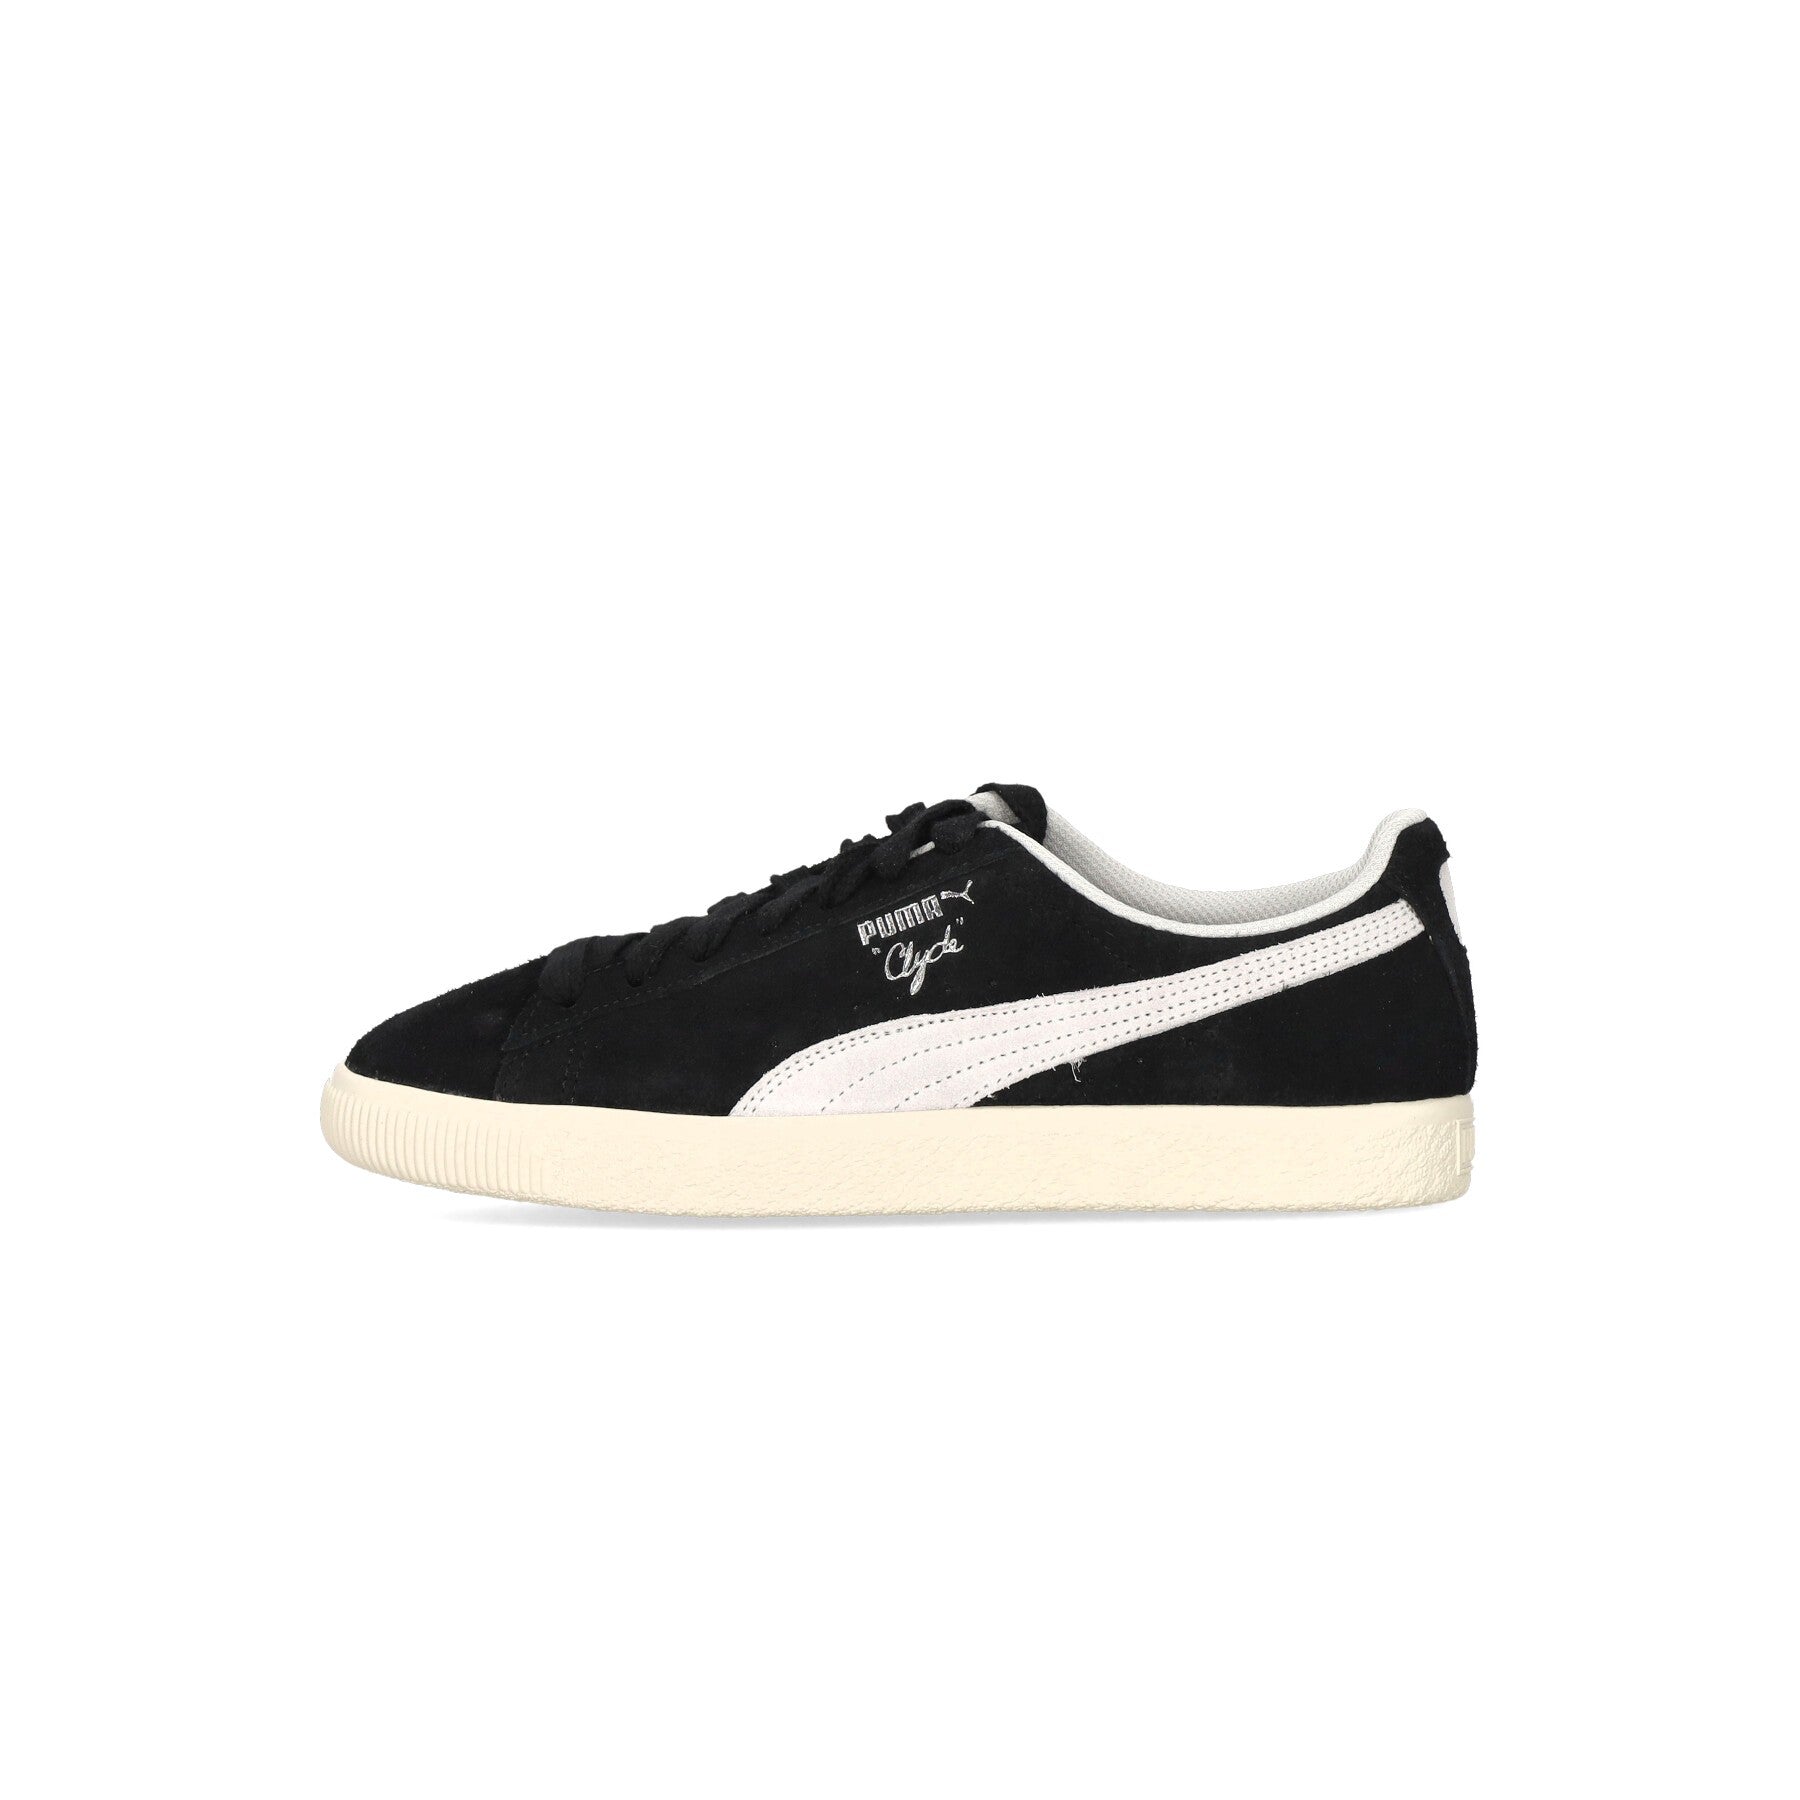 Puma, Scarpa Bassa Uomo Clyde Hairy Suede, Black/frosted Ivory